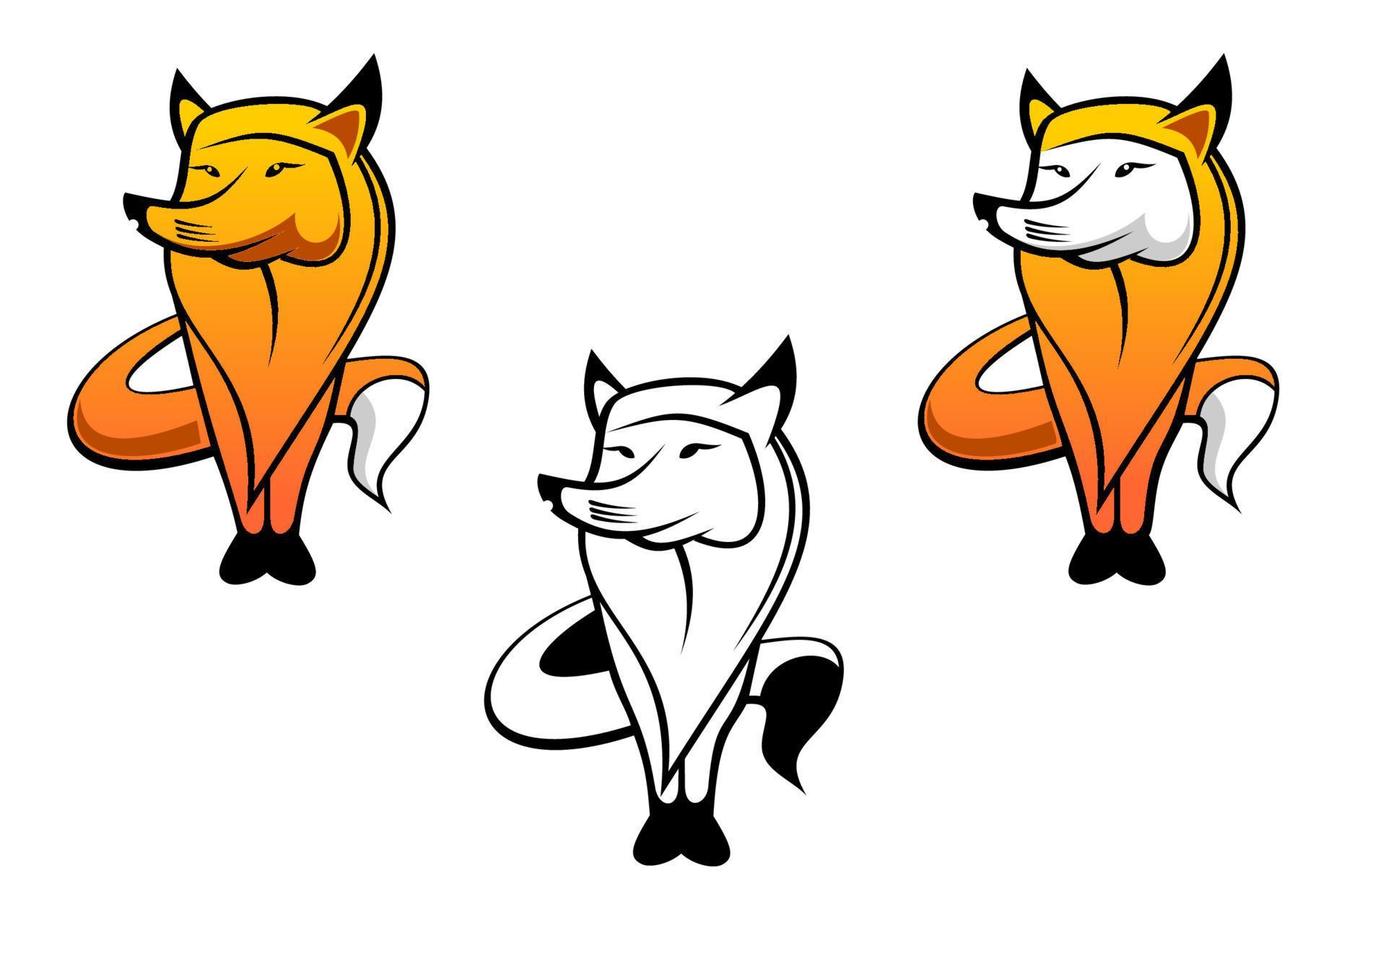 Red fox character vector